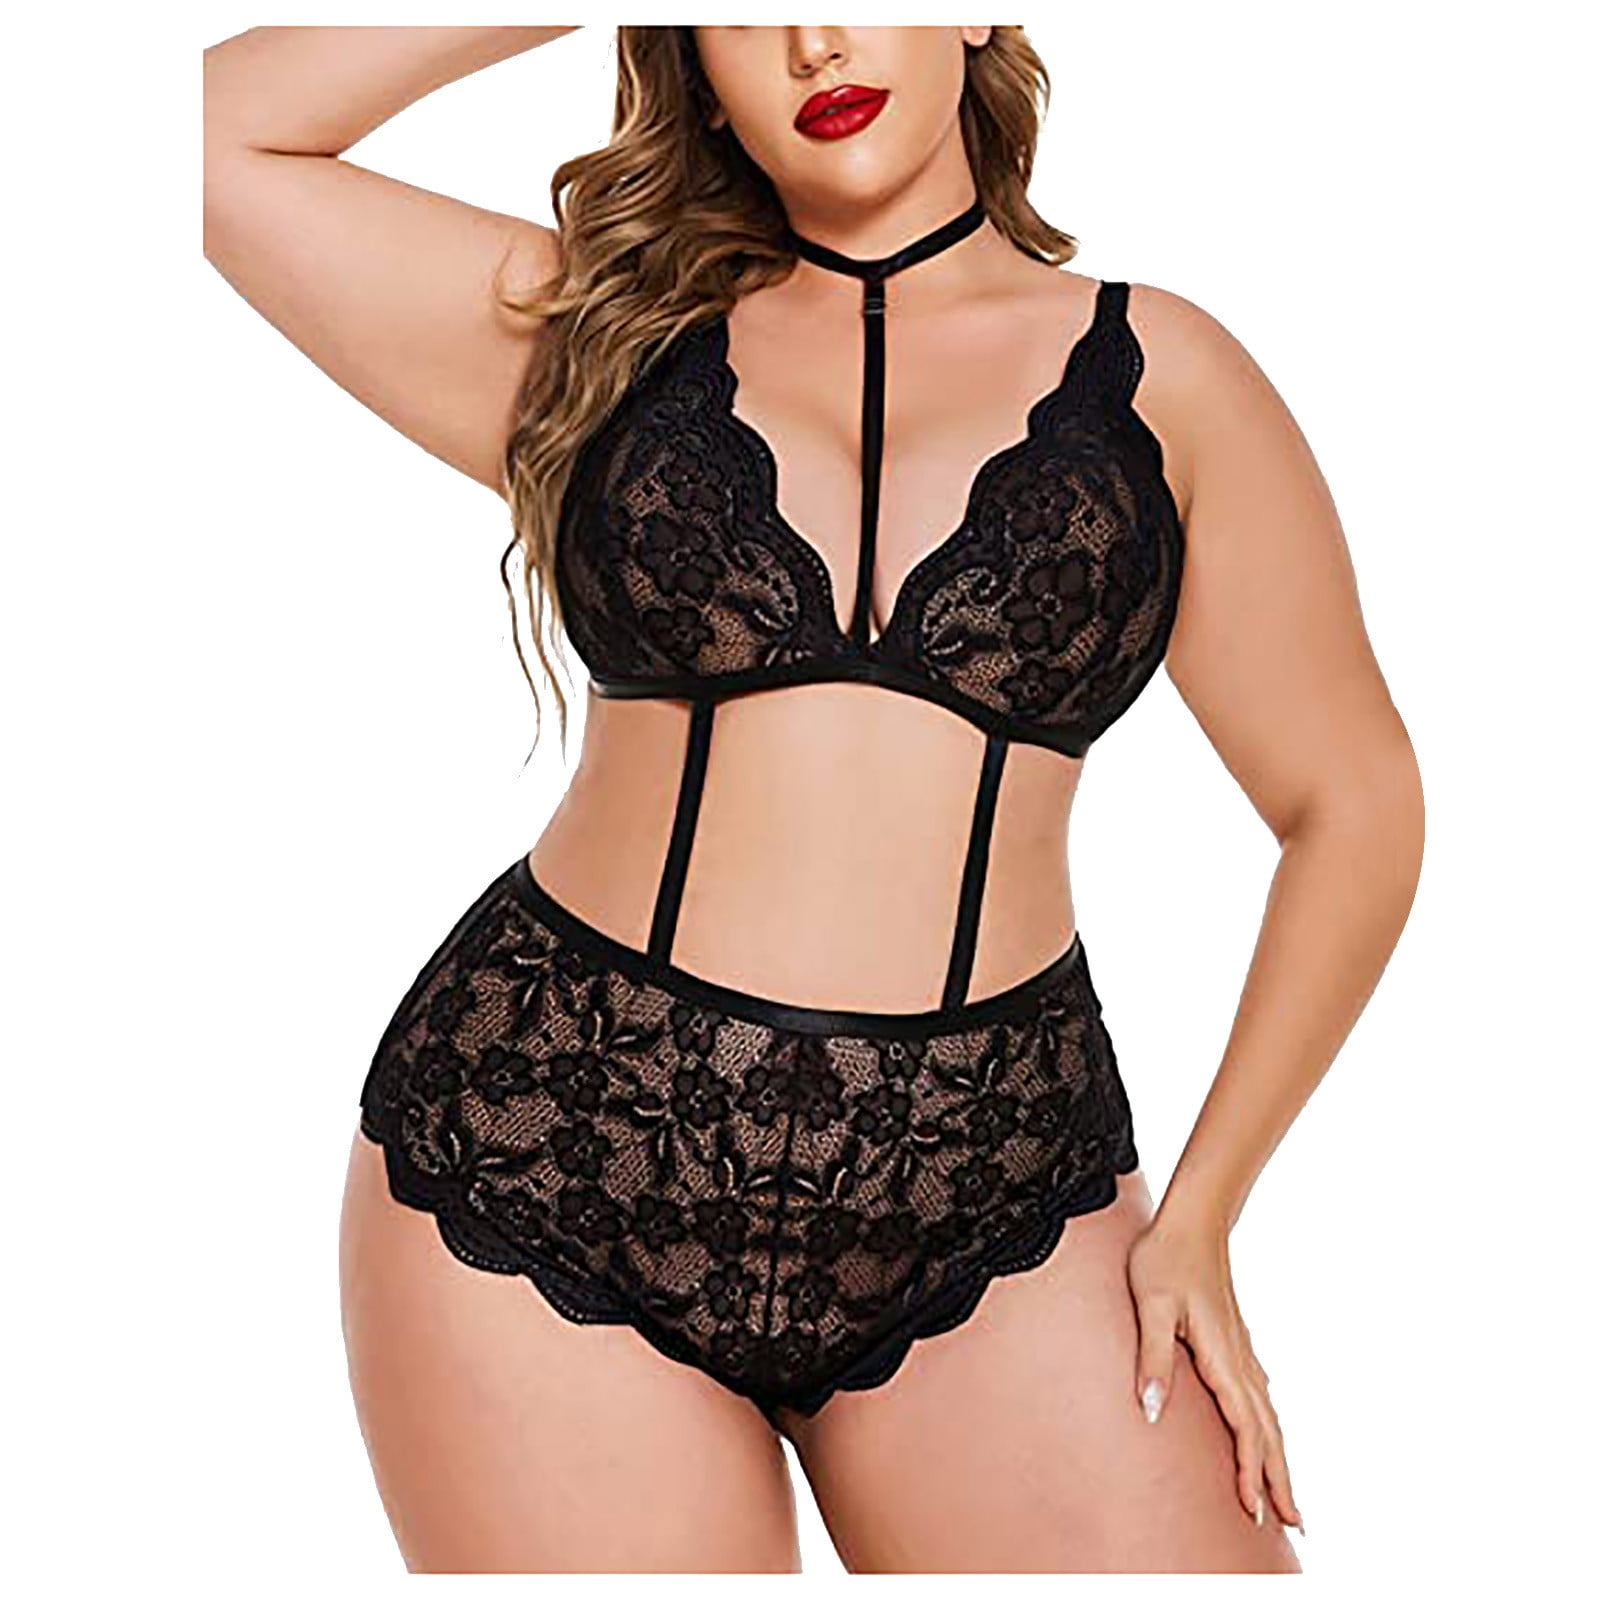 OAVQHLG3B Plus Size Sexy Lingerie for Women Naughty for Sex Play Deep V with Choker Lace Backless Underwear One Piece Teddy Nude Pic Hq